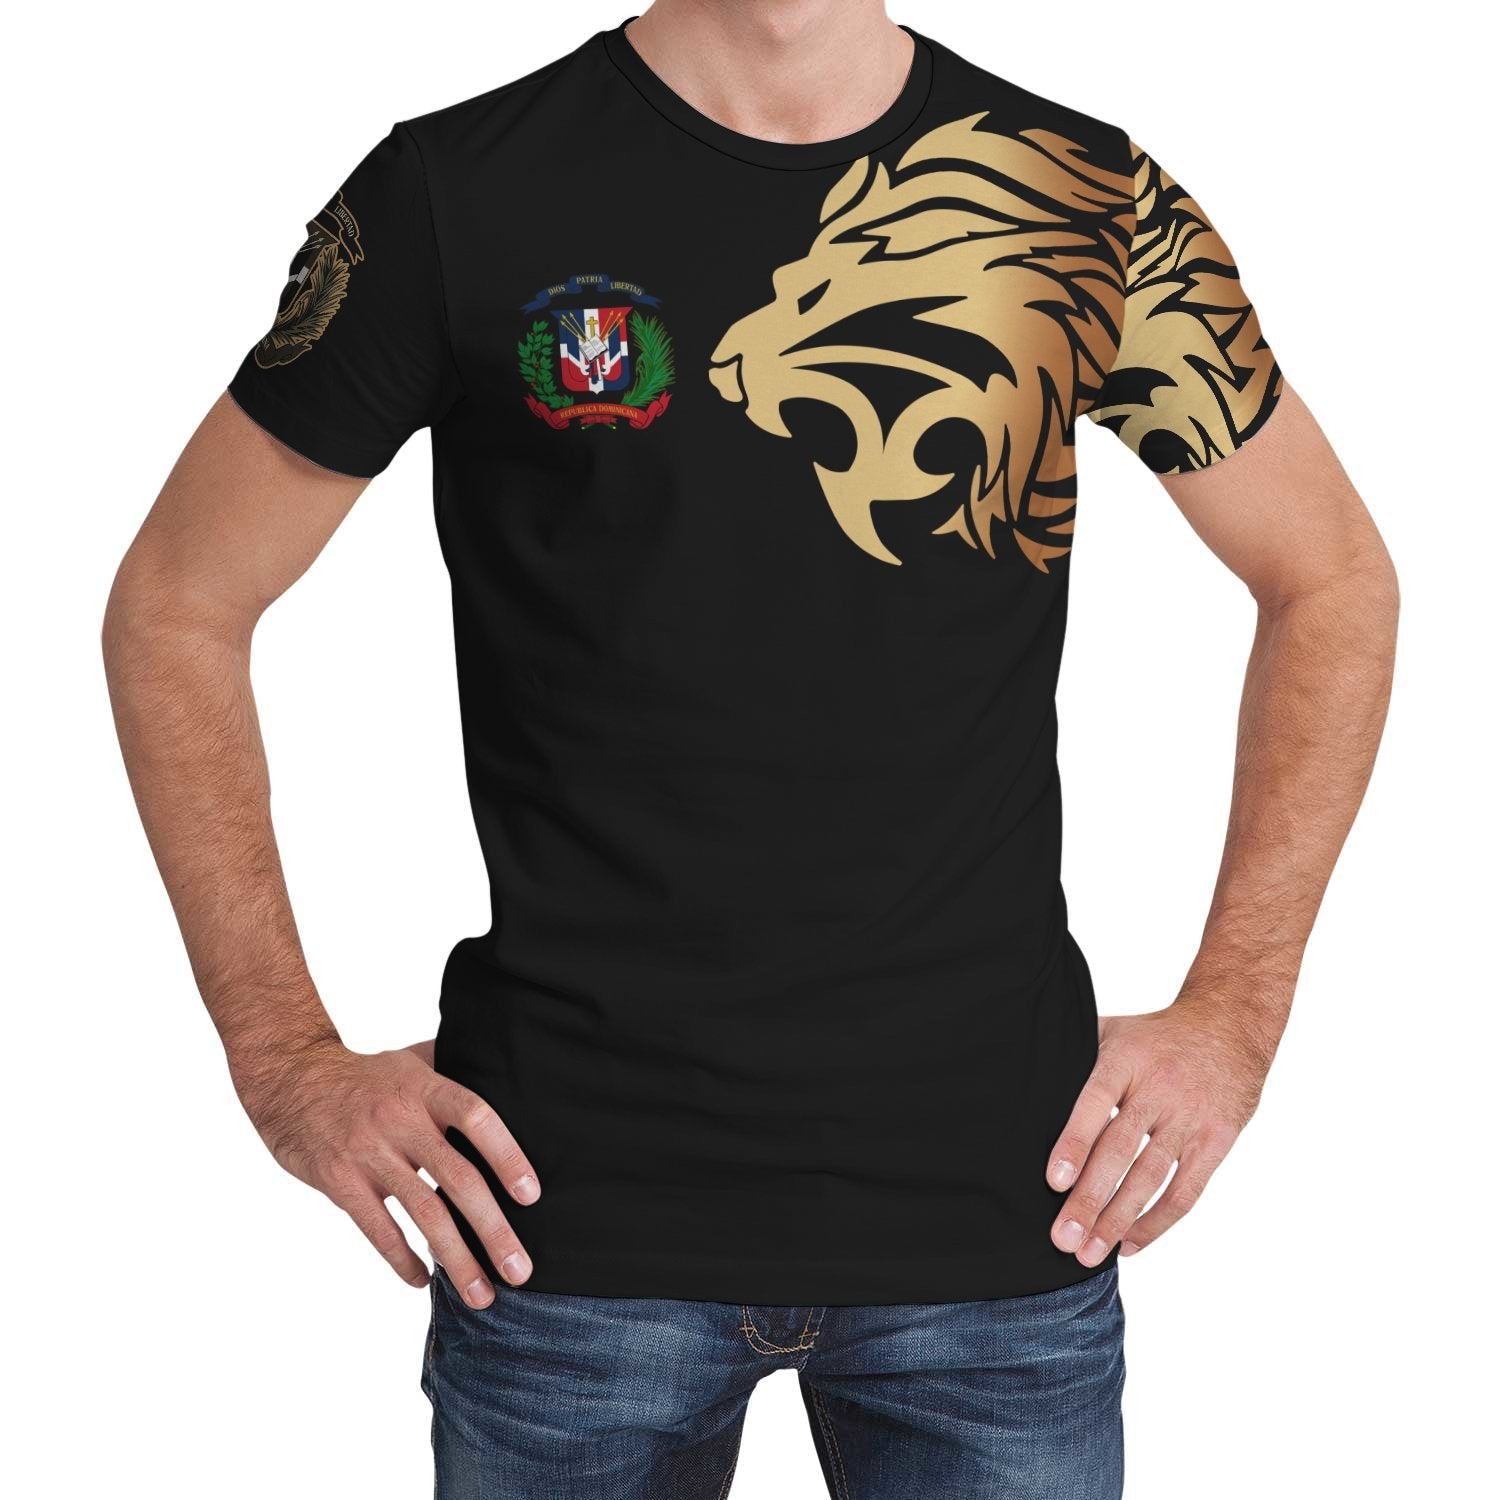 dominican-republic-t-shirts-lion-style